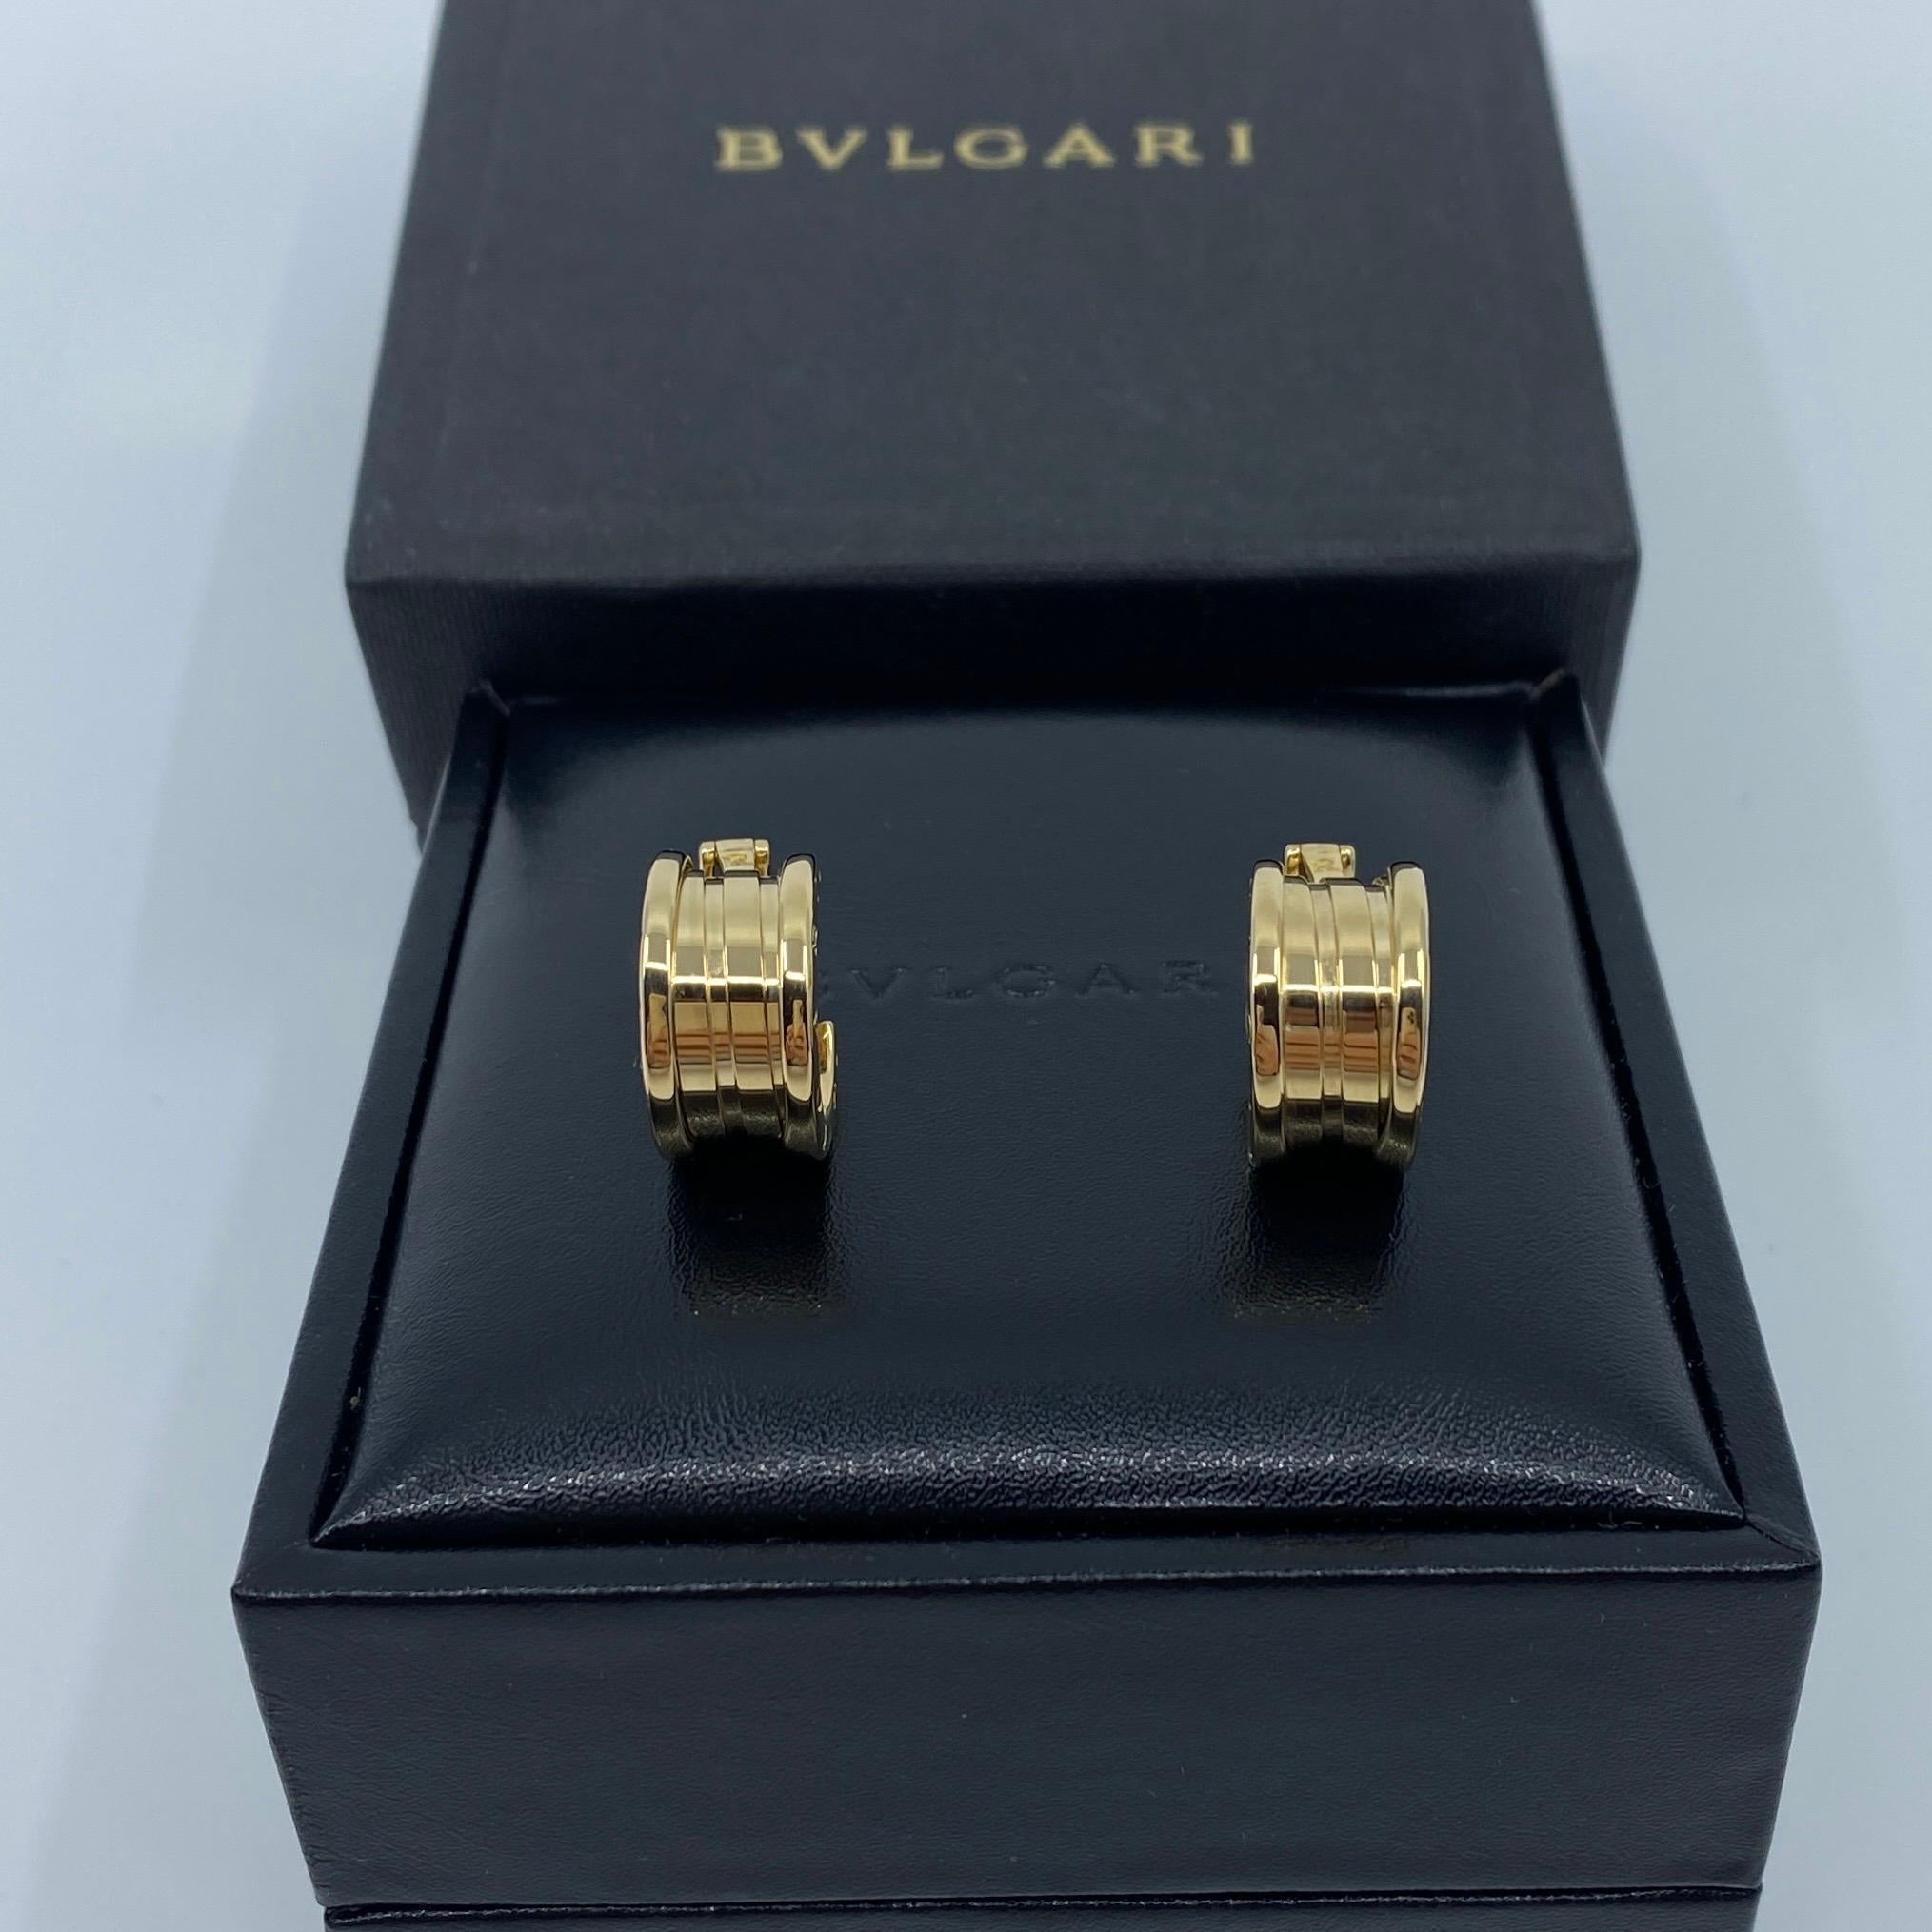 Bvlgari B.Zero1 18k Yellow Gold Hoop Earrings.

A pair of 18k yellow gold hoop earrings from the Bvlgari B.zero1 collection. 
The earrings measure approximately 17.2x17.2x9.3mm and feature lever-back fastening with a total weight of 13.8g.

Both